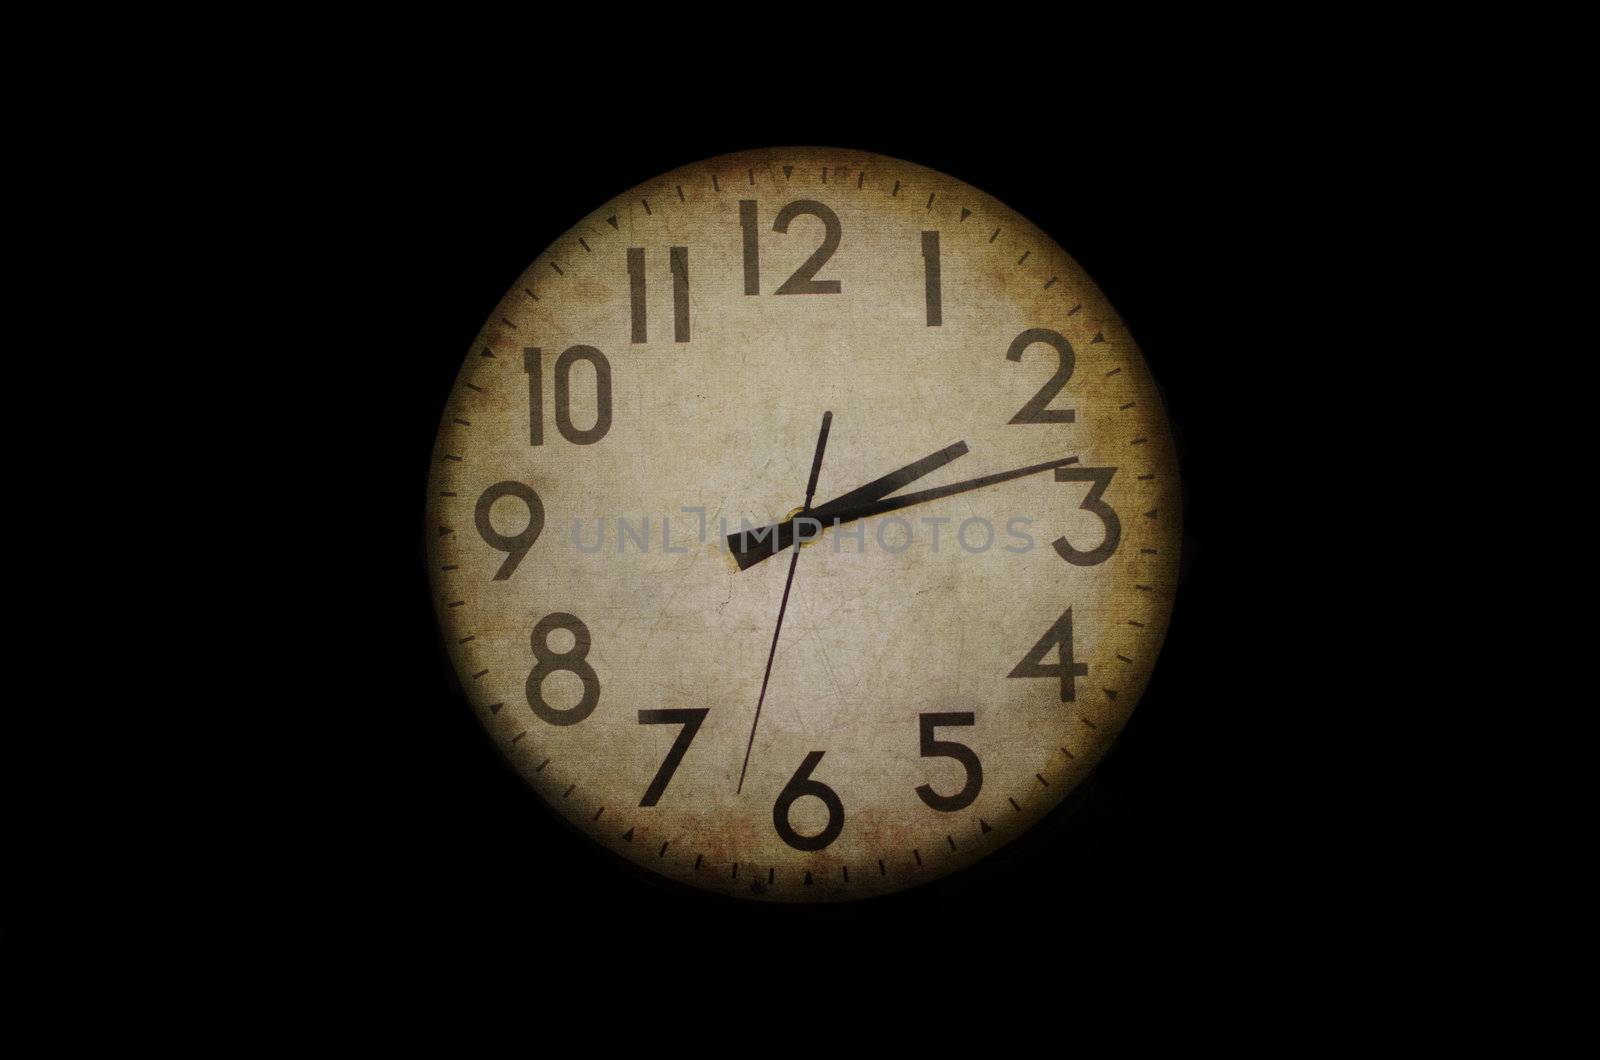 Old looking clock face showing the time. Conceptual image with added effects to appear old, grunge and vintage.